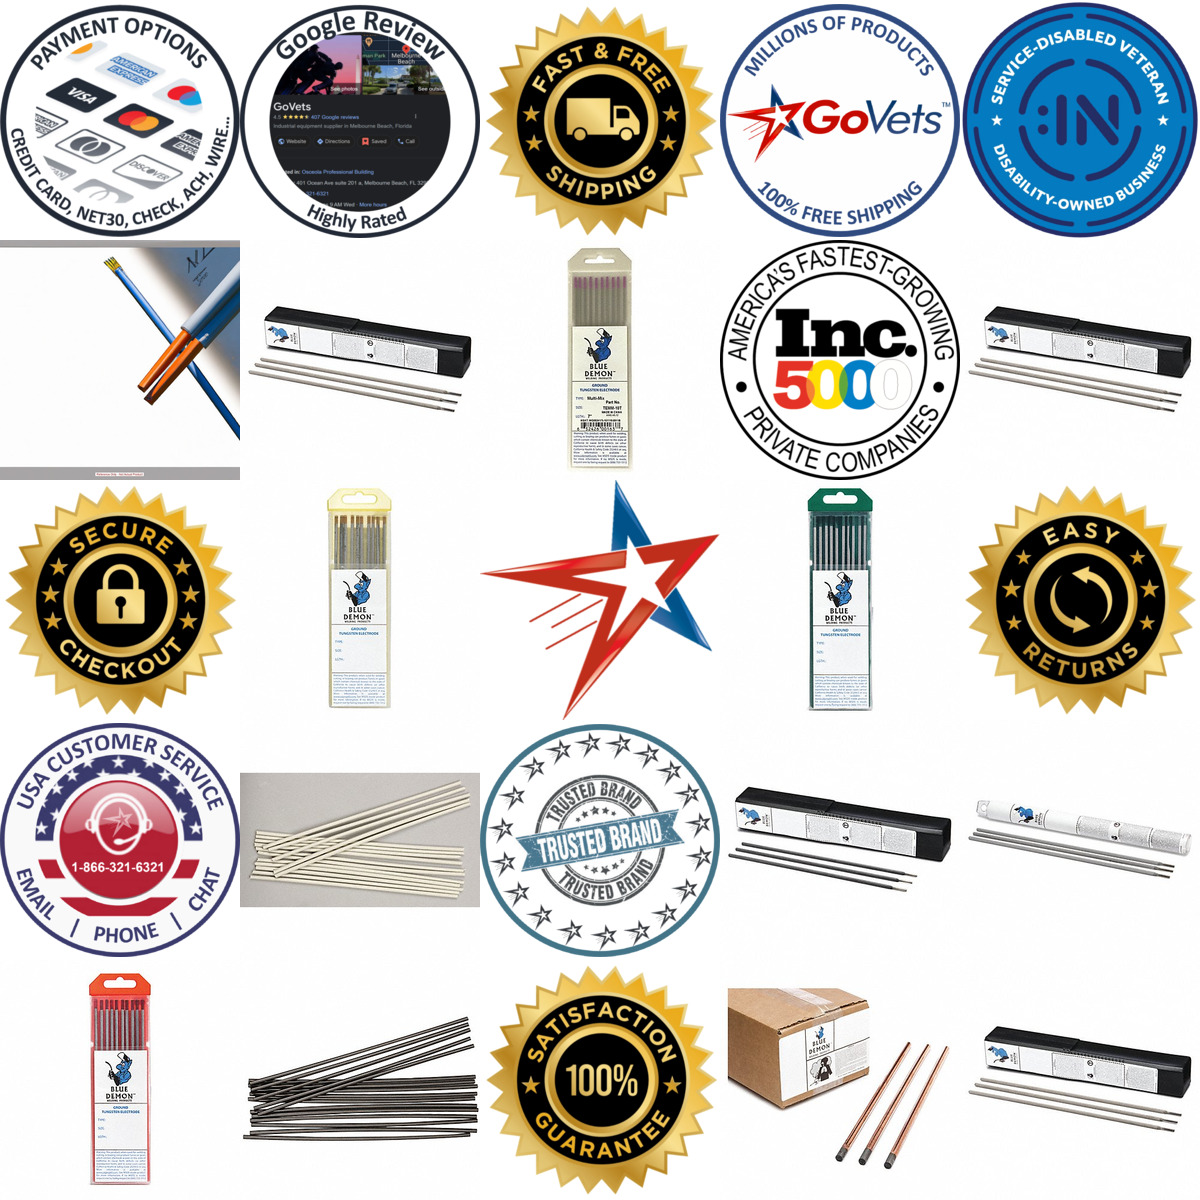 A selection of Arc Welding Rod products on GoVets